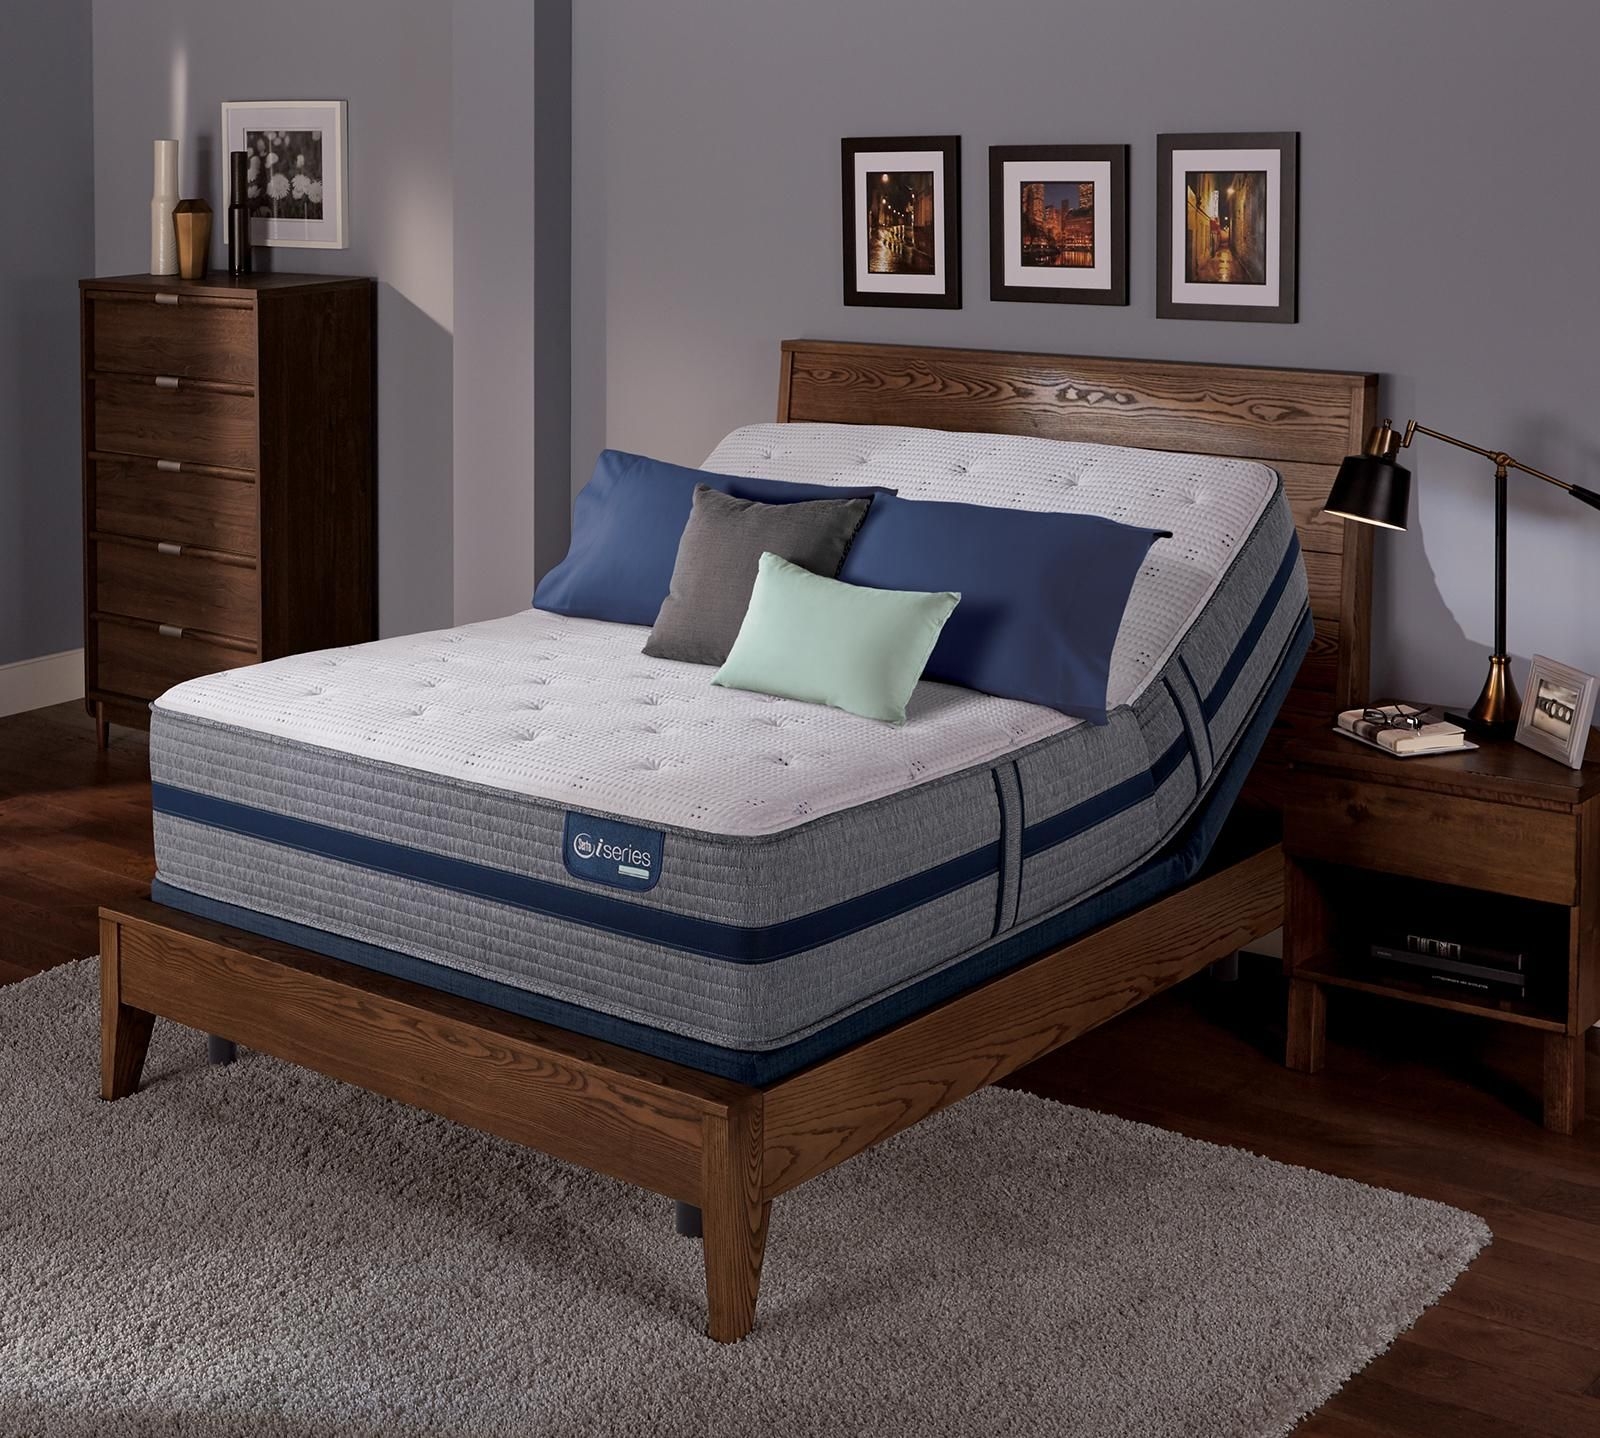 Headboards For Adjustable Beds Visualhunt, Can I Put A Headboard On An Adjustable Bed Frame